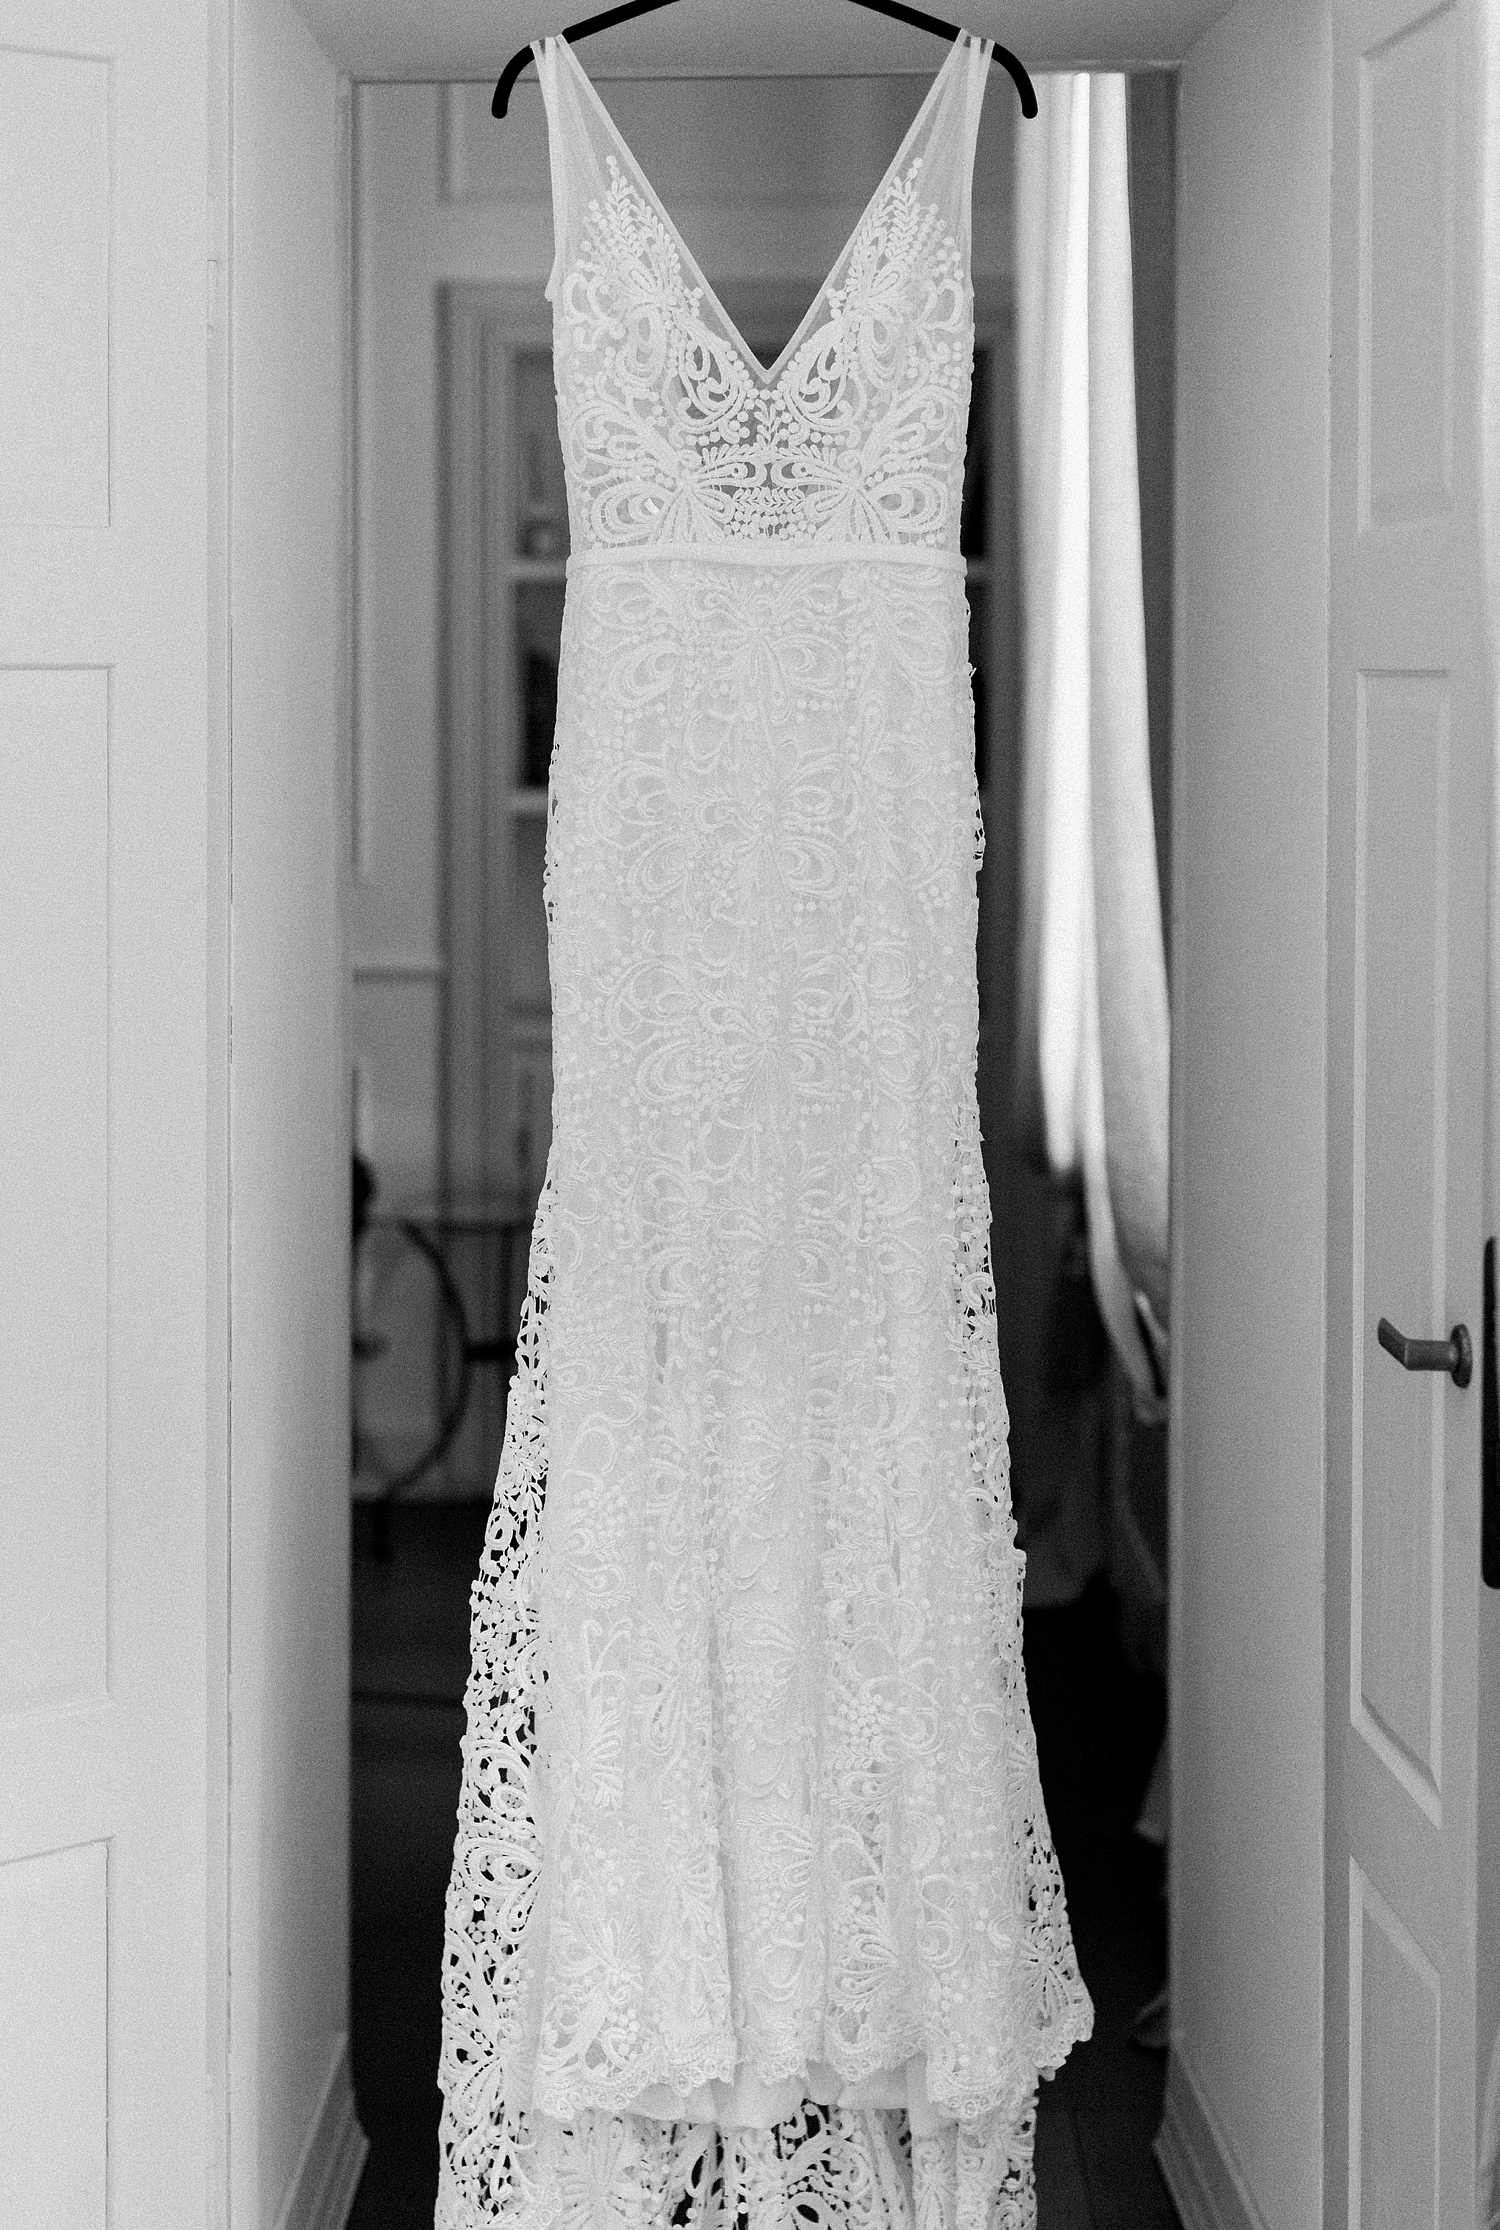 black and white wedding dress hanging in doorway lace